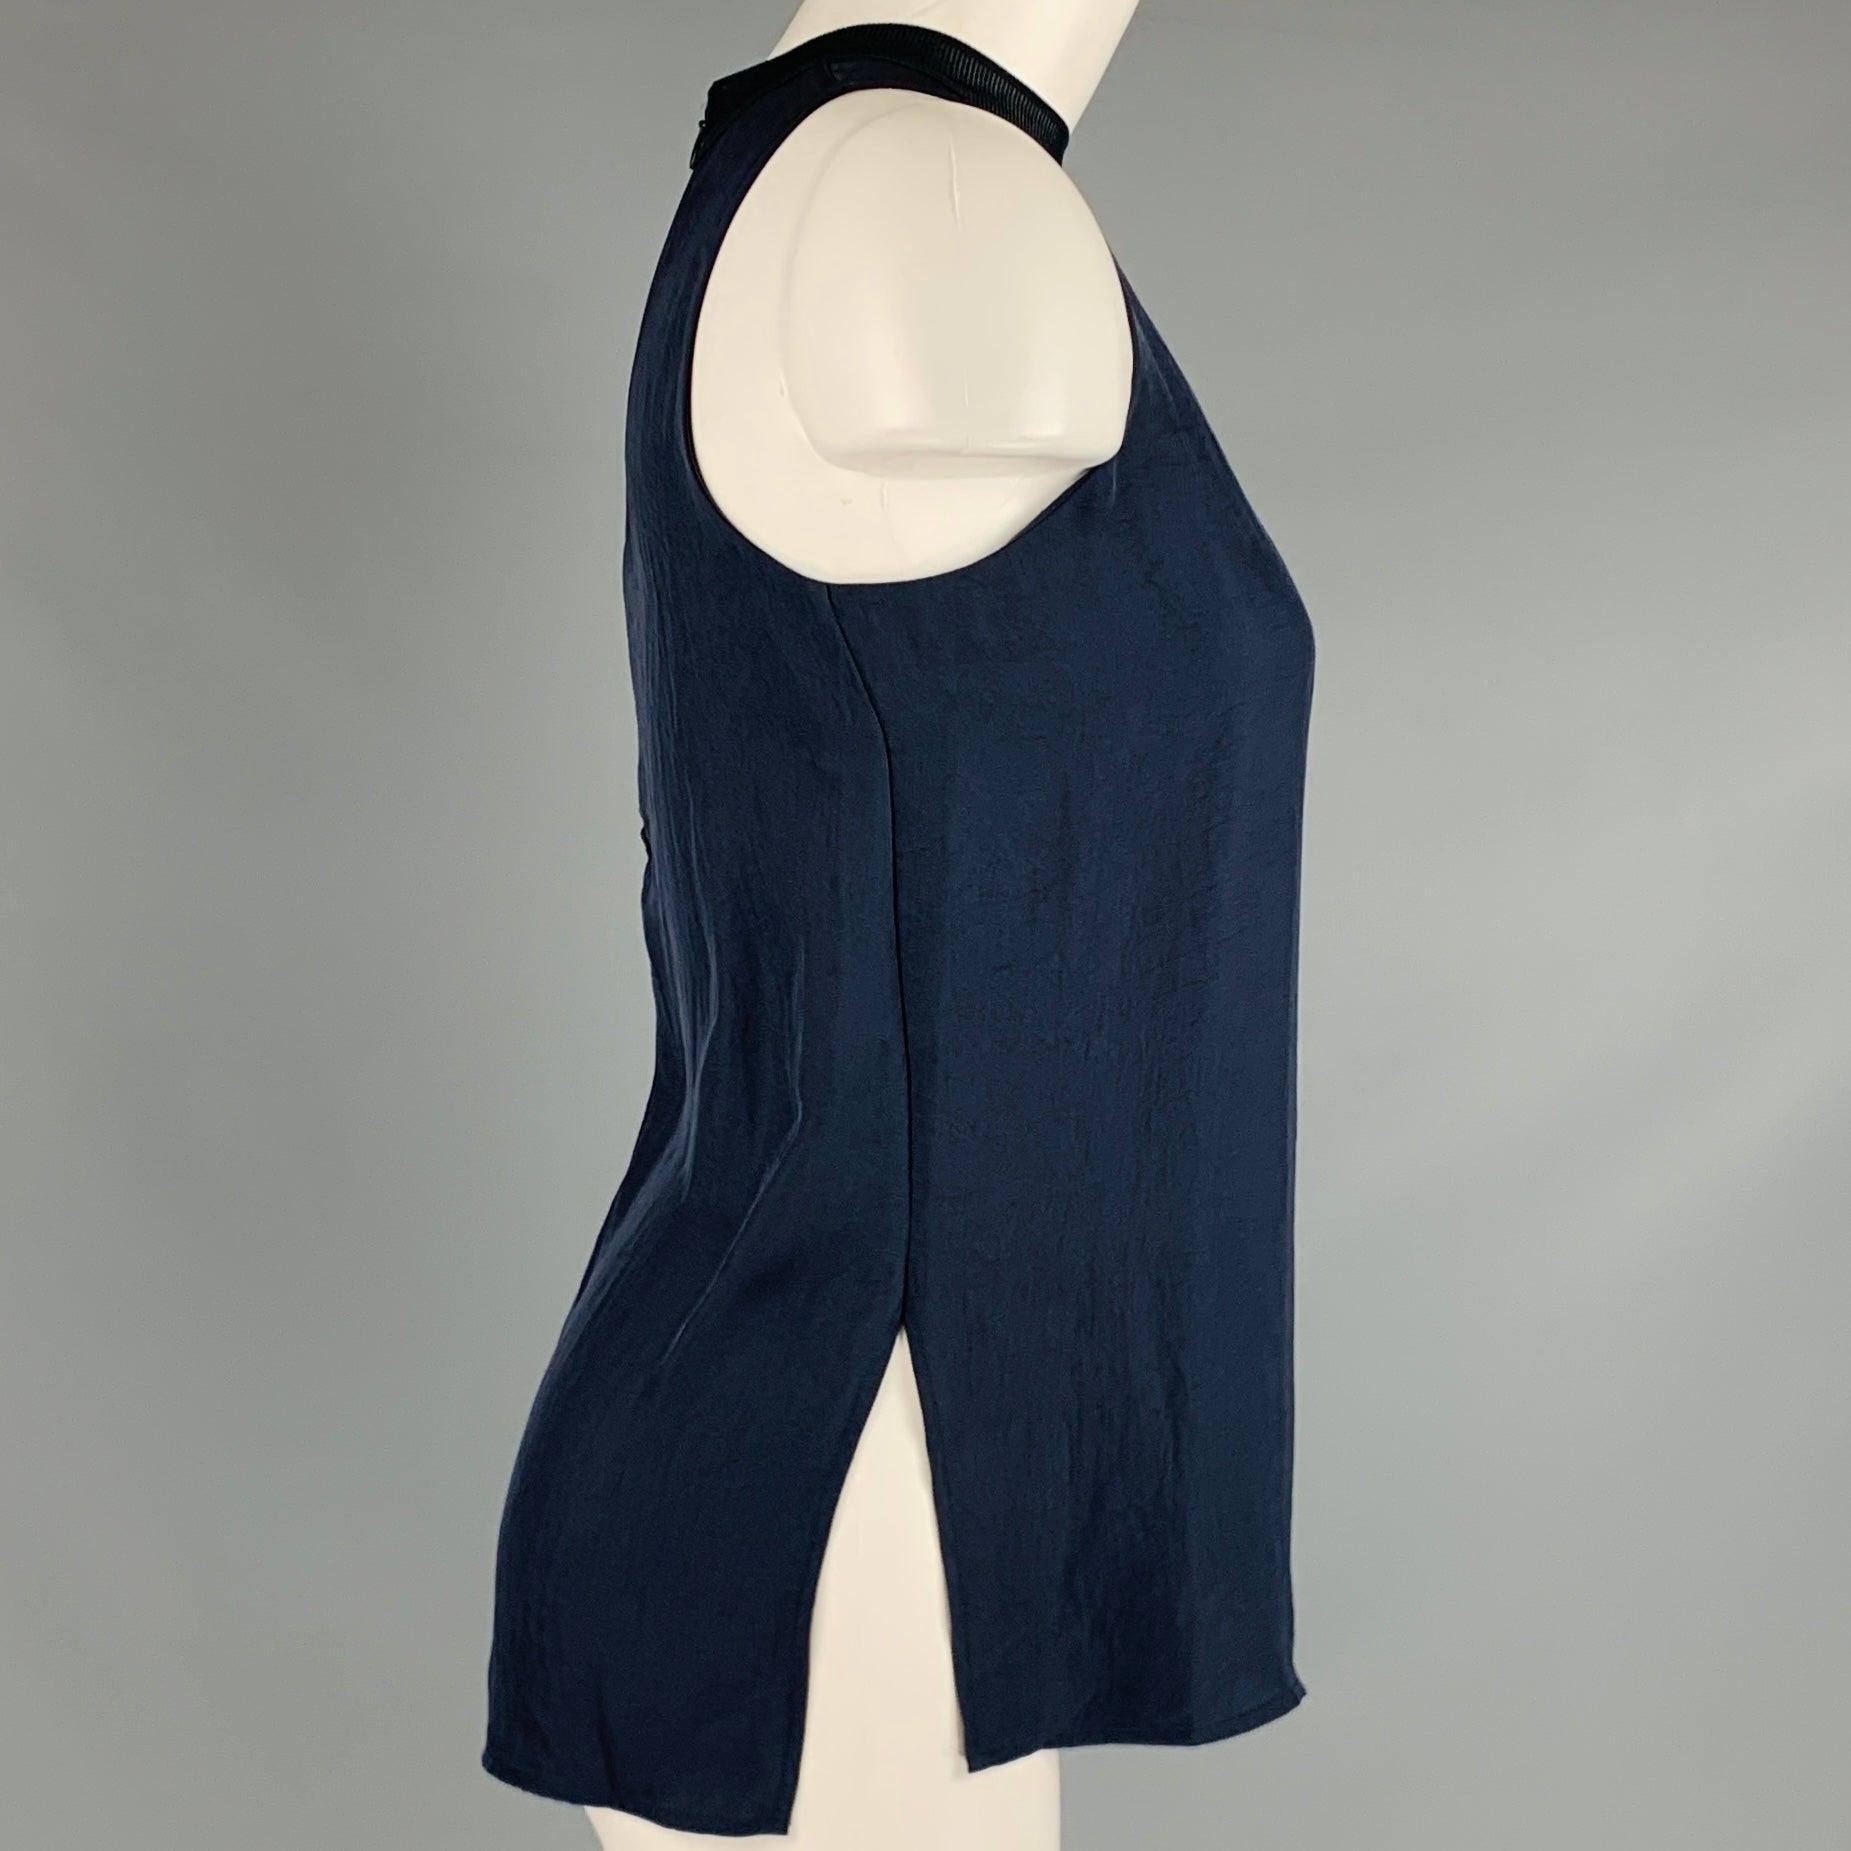 VINCE casual top
in a
charcoal grey rayon fabric featuring a sleeveless style, high neck, side slits, and back zipper closure.Excellent Pre-Owned Condition. 

Marked:   XS 

Measurements: 
  Bust: 32 inches Length: 24.5 inches 
  
  
 
Reference